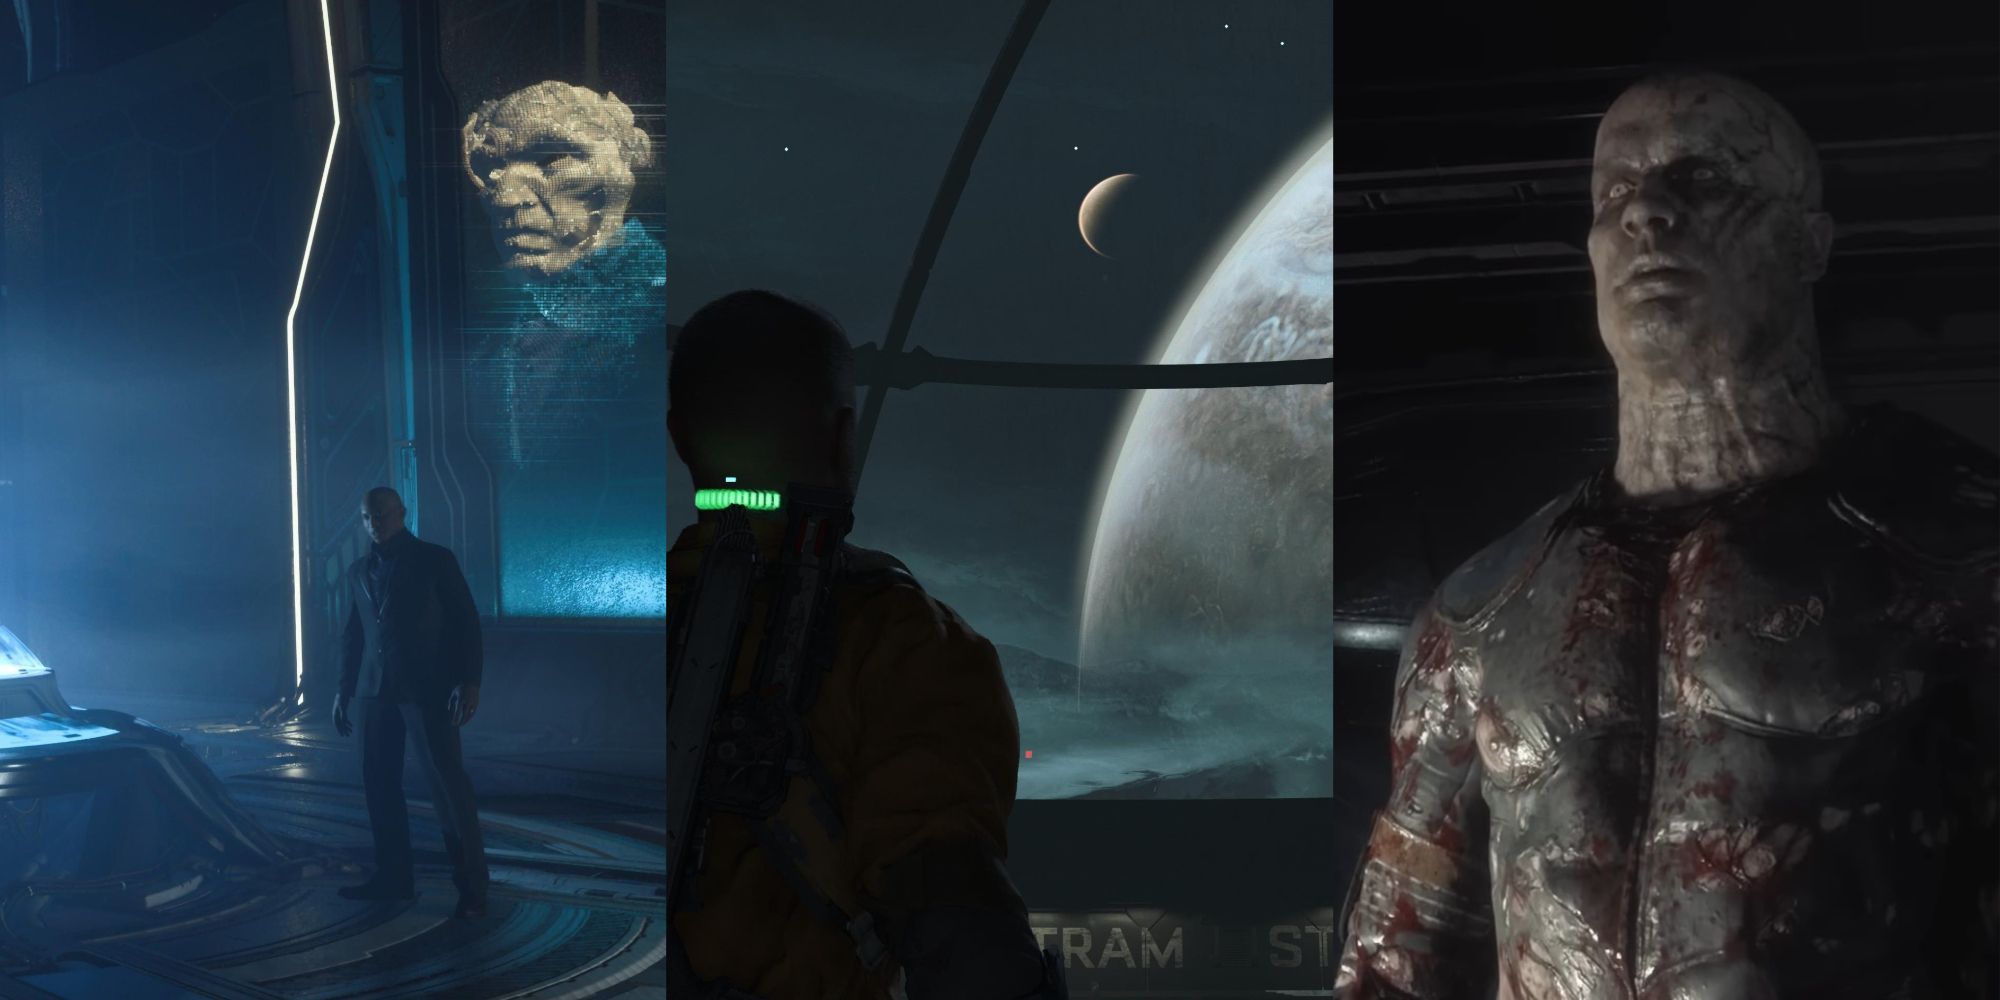 Split image collage of the warden holding a meeting with The Commonality, Jacob overlooking Jupiter and a distant moon, and Ferris as the Alpha form in The Callisto Protocol